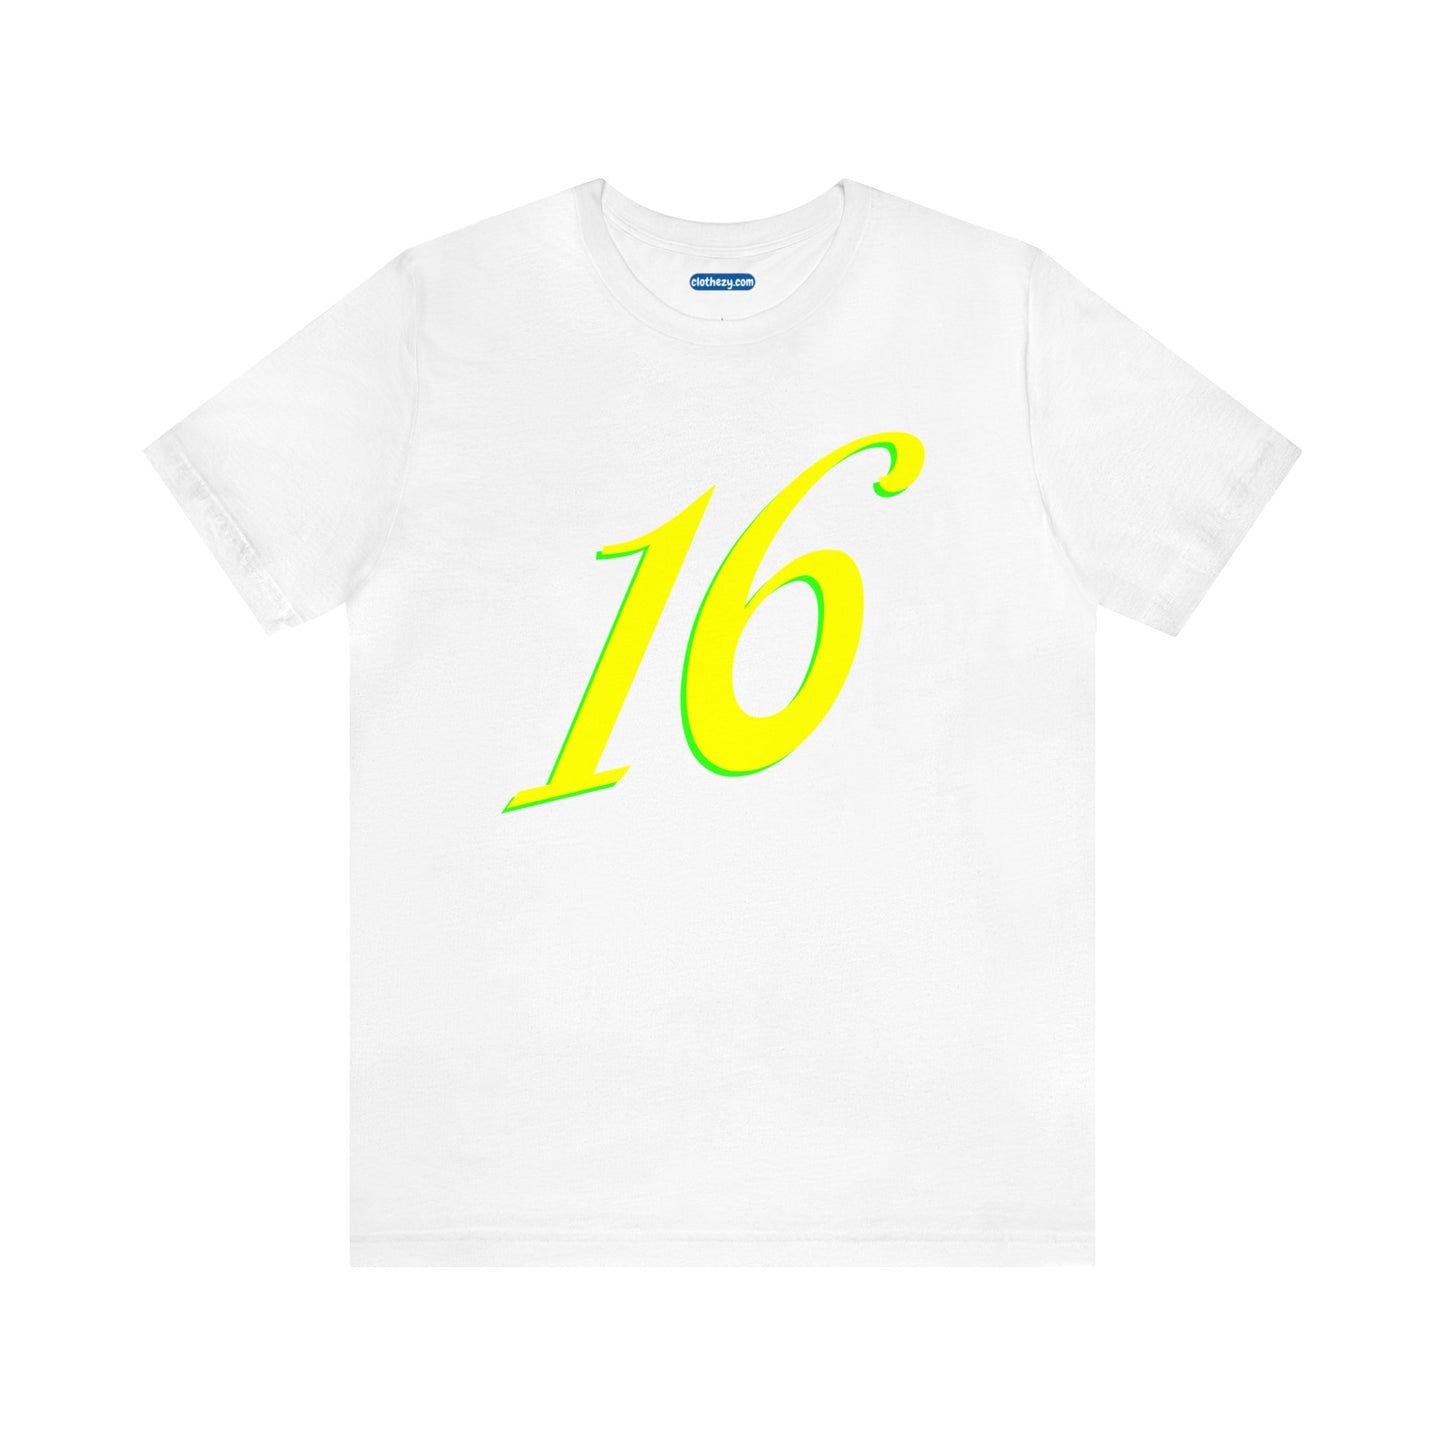 Number 16 Design - Soft Cotton Tee for birthdays and celebrations, Gift for friends and family, Multiple Options by clothezy.com in White Size Small - Buy Now